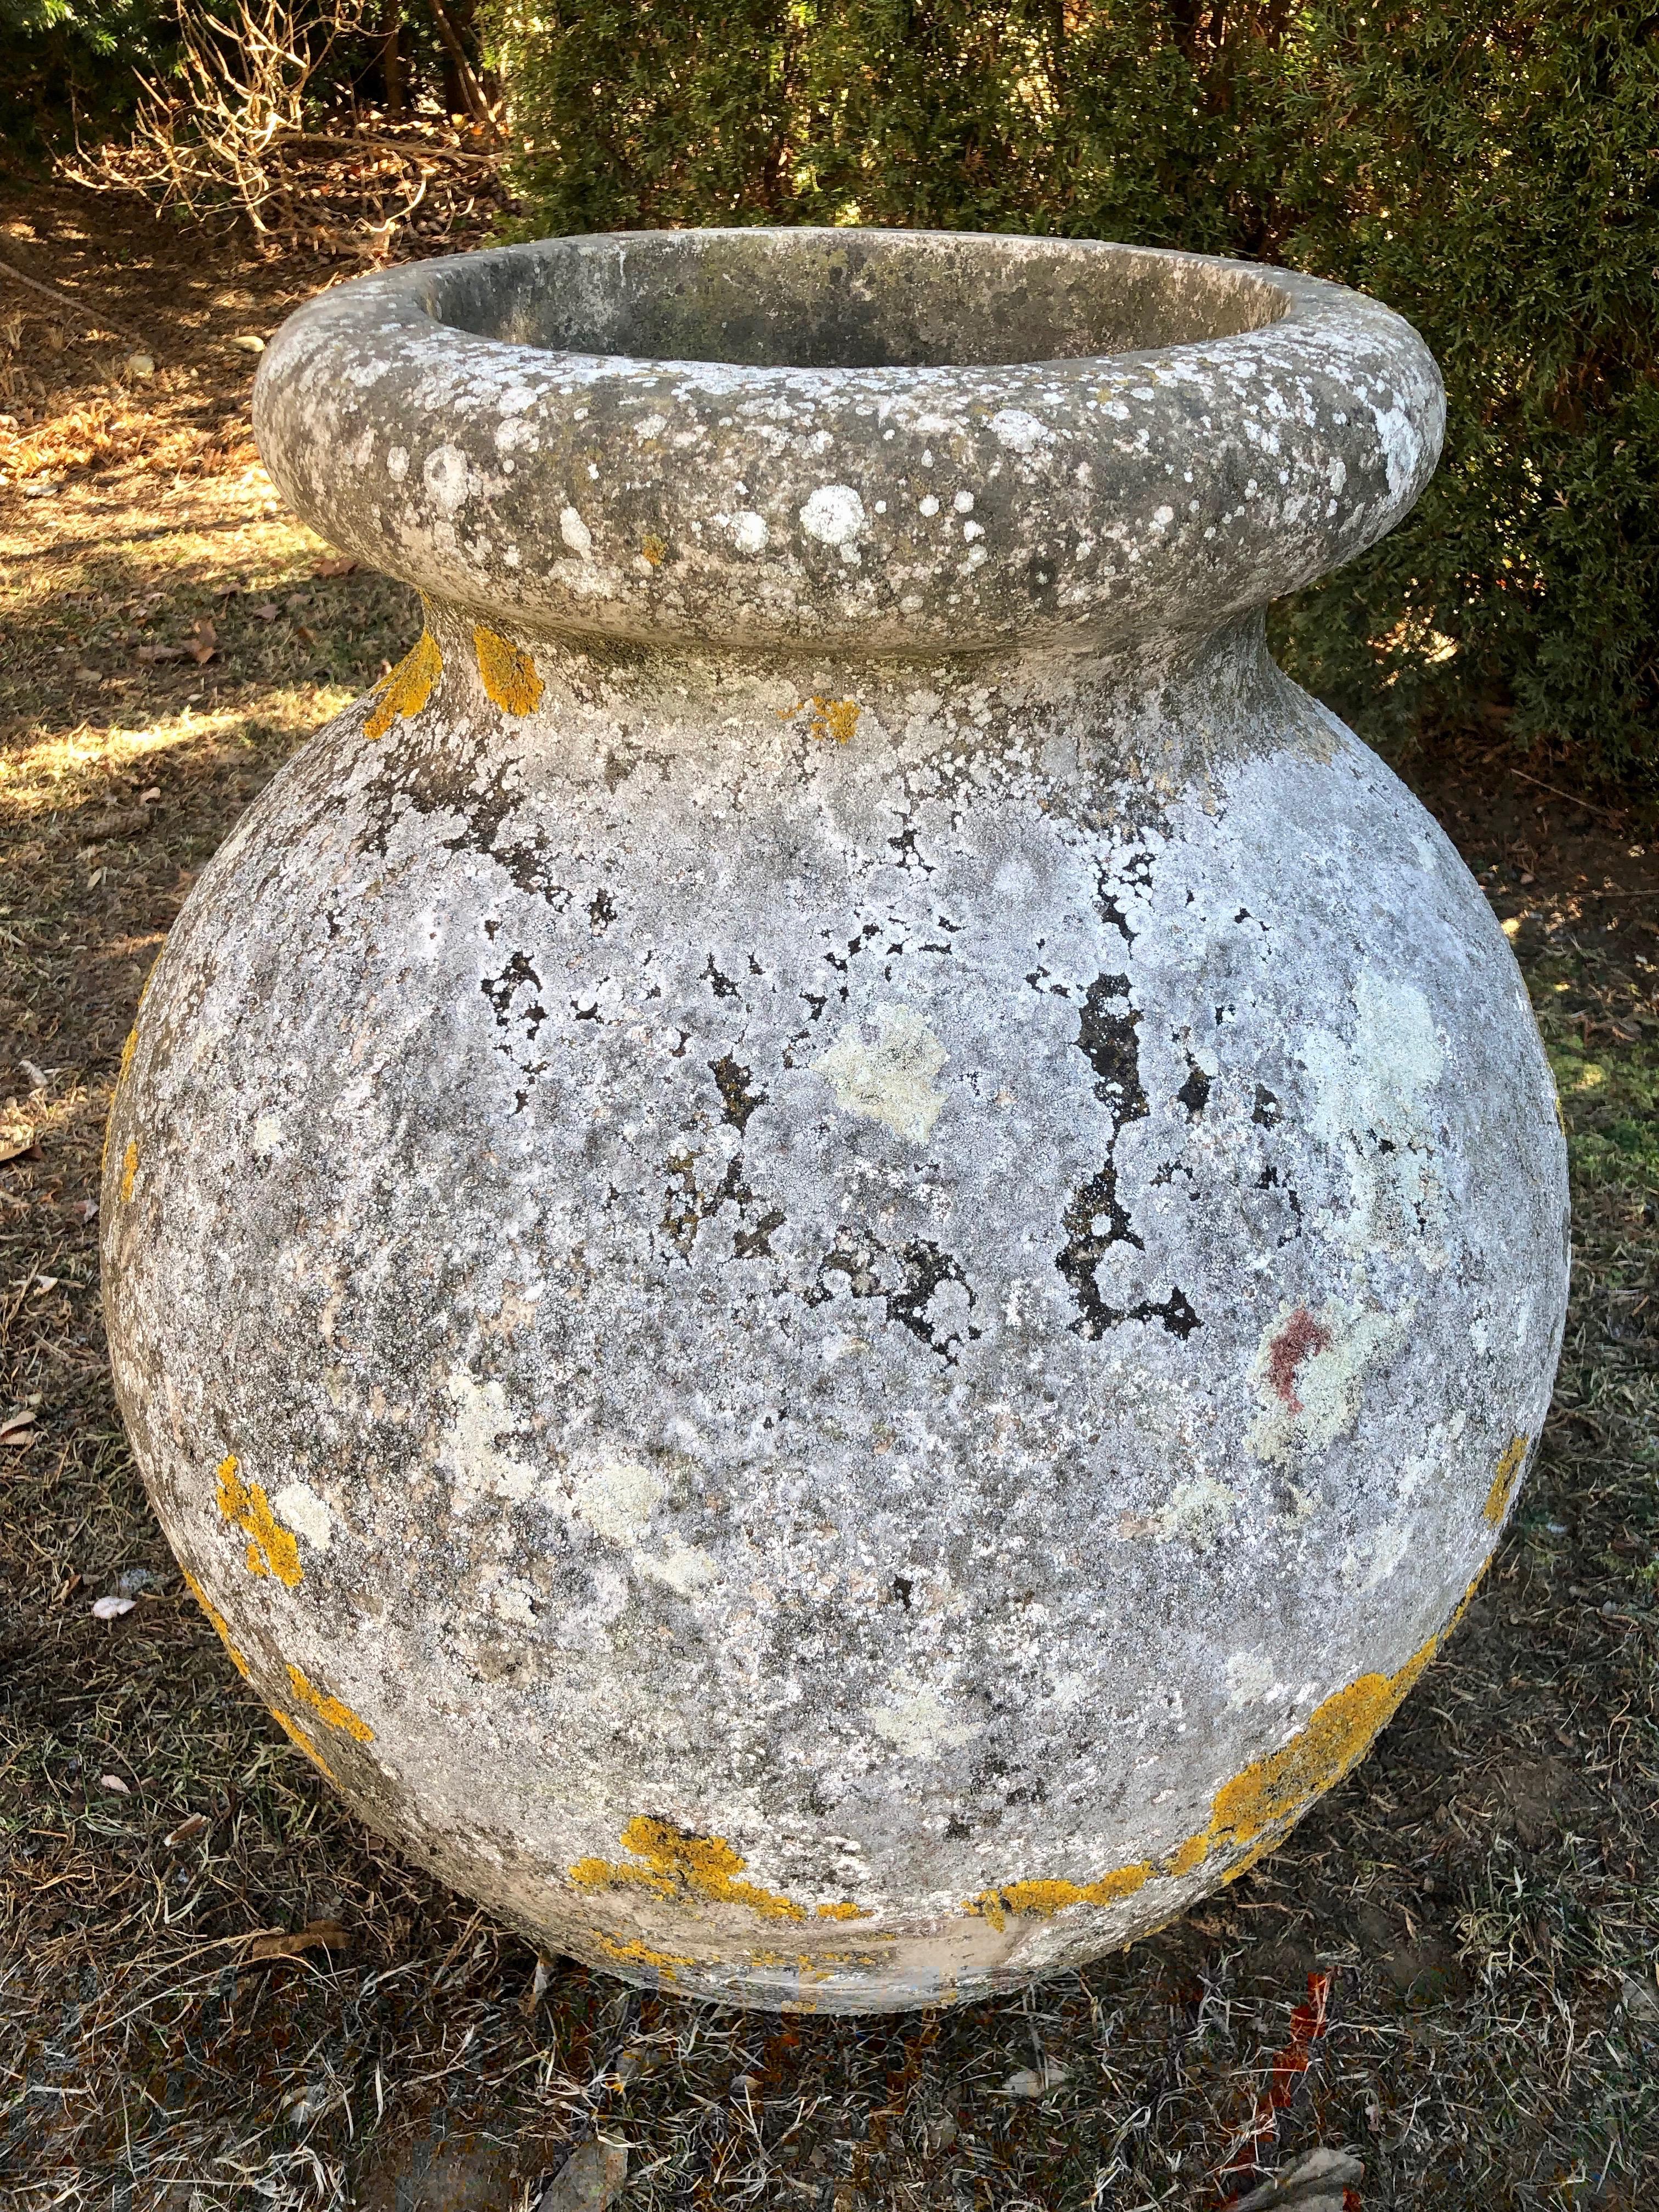 When we originally saw this pot, we were sure it was carved stone because of its superb patina, but, upon further examination, it is made of fiber cement, a lightweight and very durable material that can be left outside year-round in all climates.